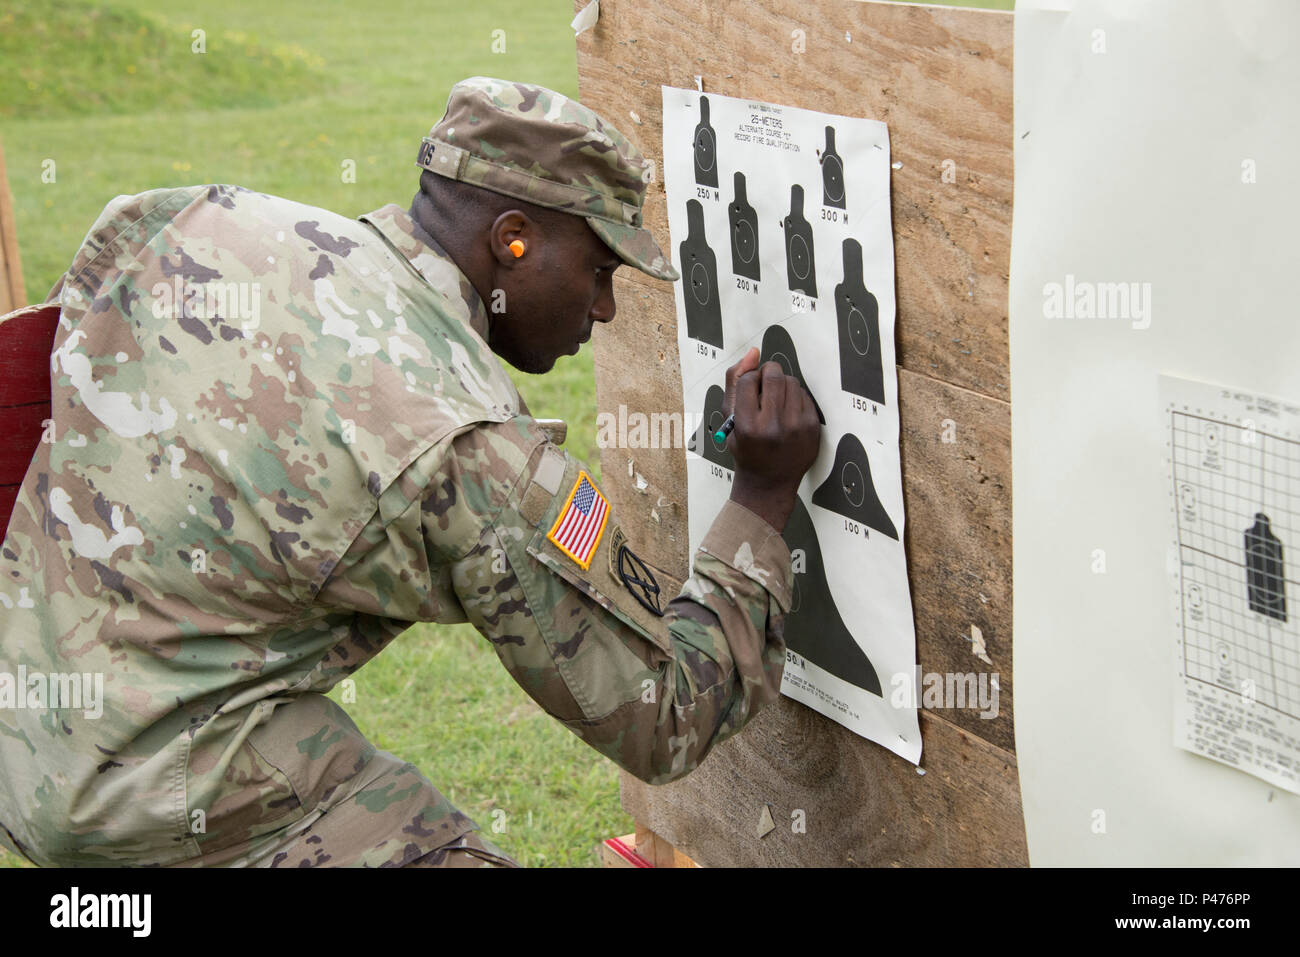 U.S. Army Sgt. Damarcus Davis supports the competition during the Joint Multinational Training Command Best Warrior Competition at Grafenwoehr Training Area, Germany, June 21, 2016. The four-day competition challenges soldier and noncommissioned officers all of who have previously competed to be named the best in their units, to prove their skills in military knowledge, leadership, and endurance in the warrior task and drills critical to success and survival on the modern battlefield. (U.S. Army Photo by Visual Information Specialist Gerhard Seuffert/released) Stock Photo